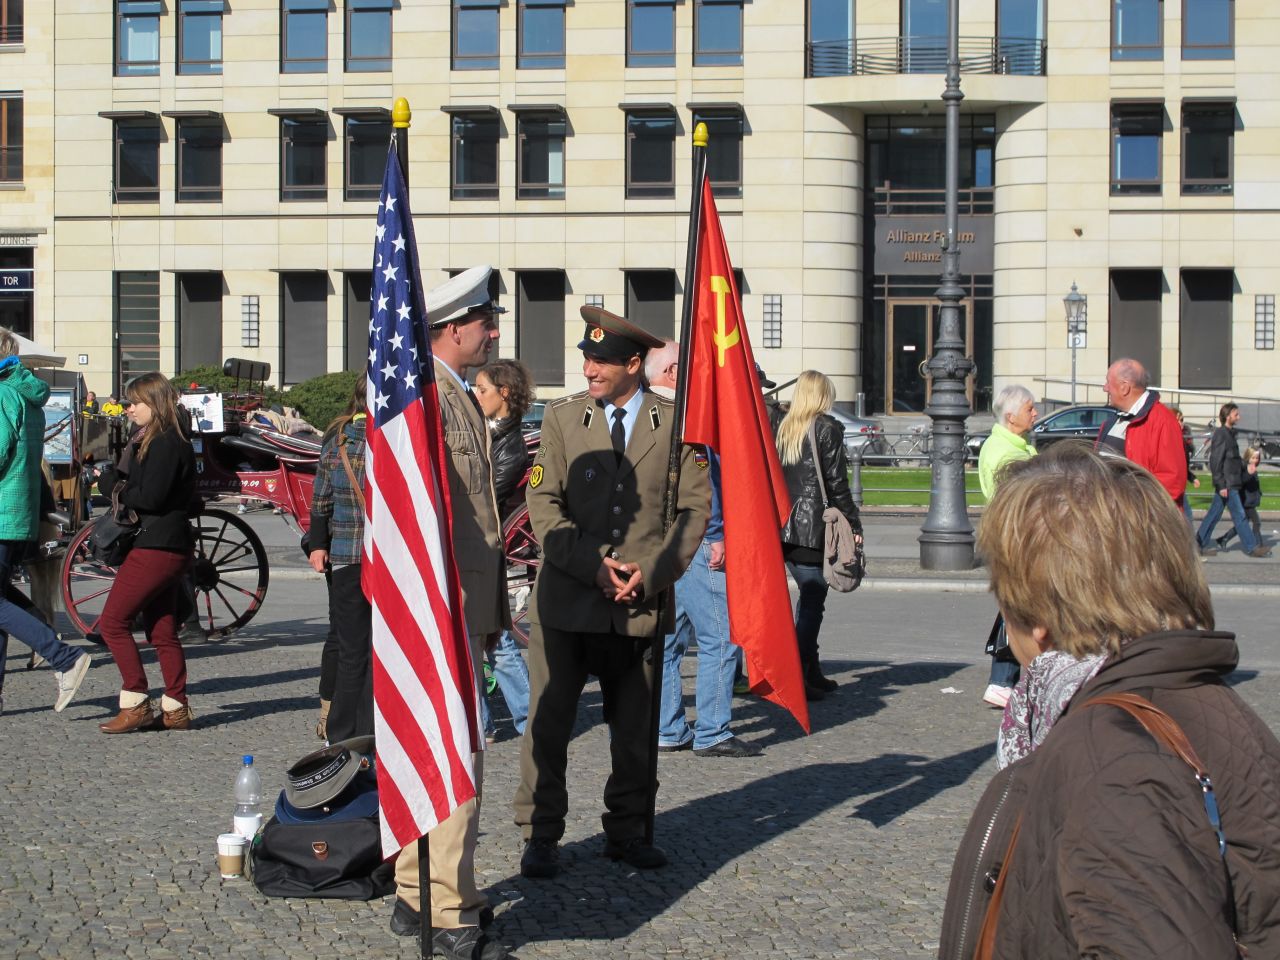 Few European cities have been more recently affected by the U.S. than Berlin, where America's role in propping up West Berlin during the Cold War against Soviet Communism remains in the public conscience.